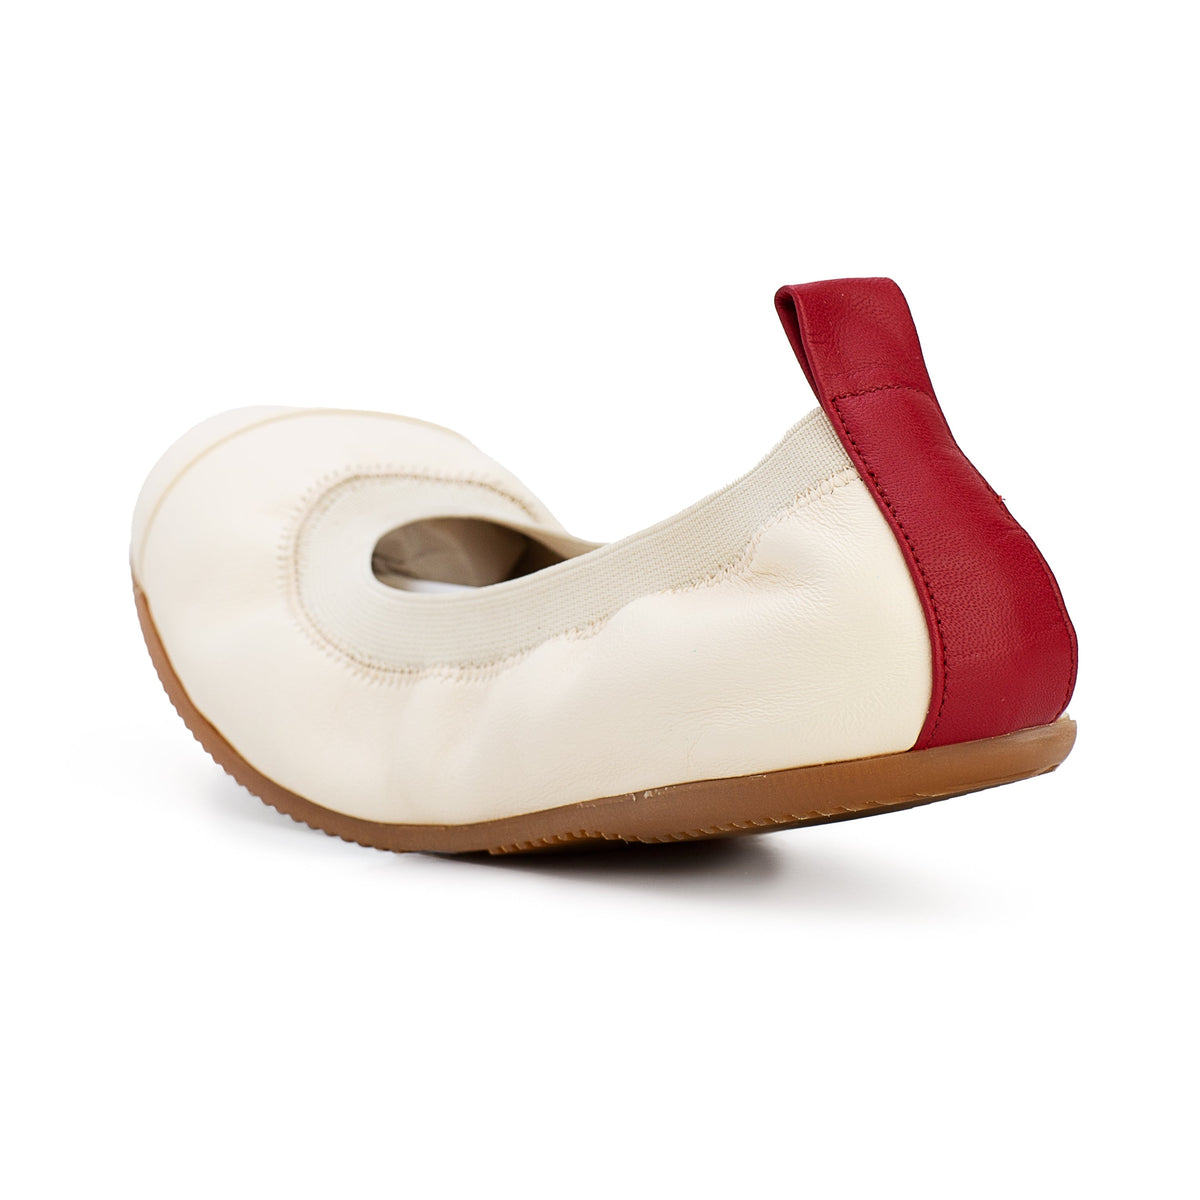 Sofia - Eggshell and Red Ballet Flats Ballet Flats Cammino Shoes 